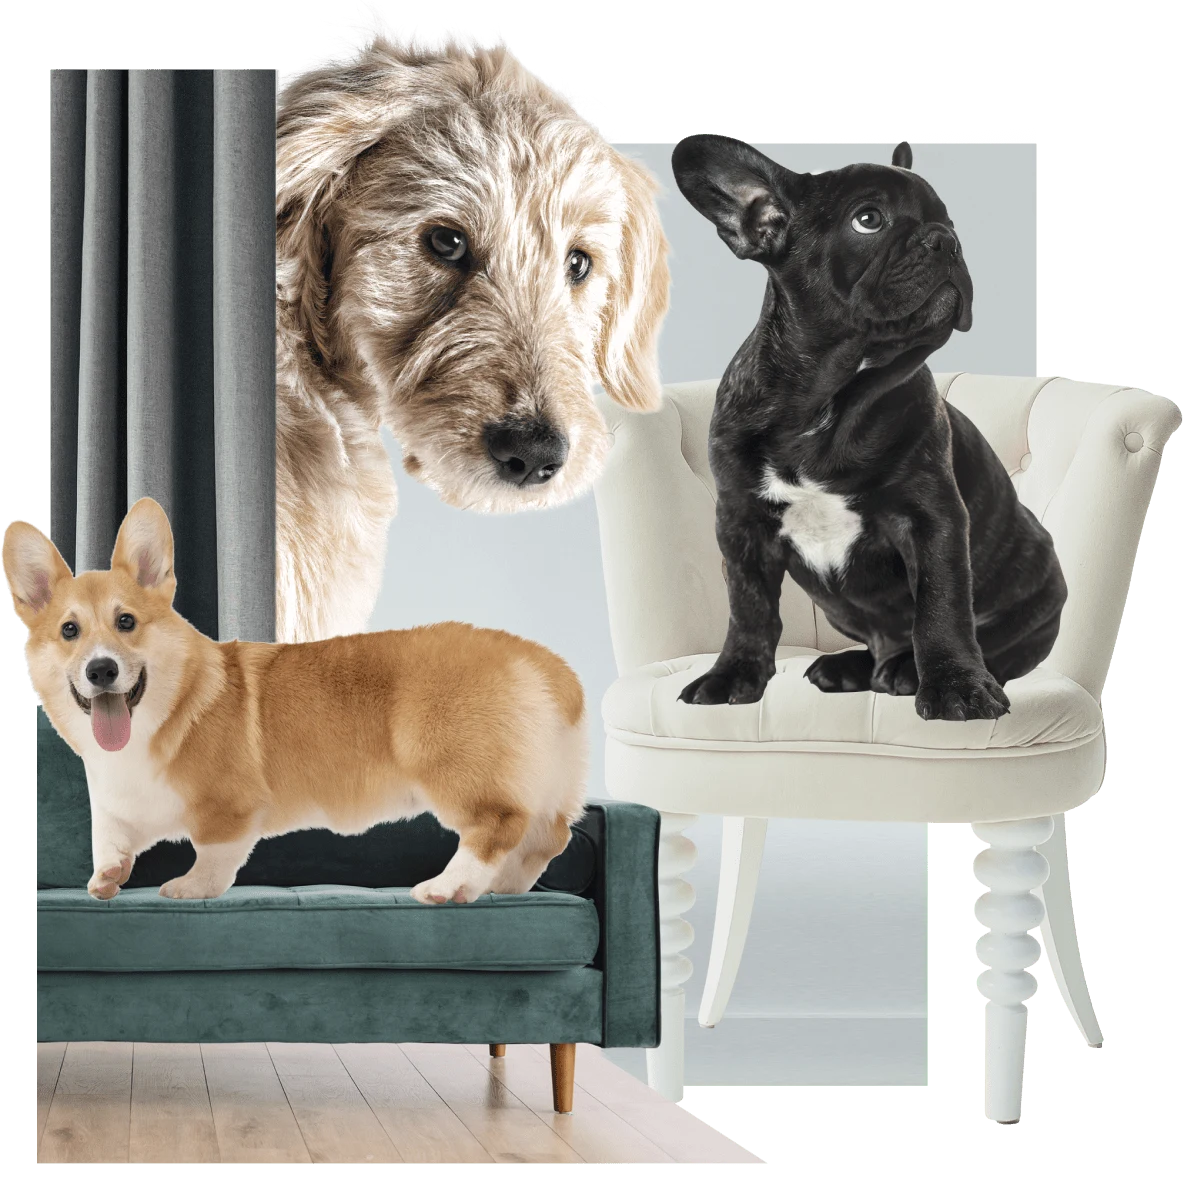 A corgi stands on a green sofa on the left. A French bulldog sits on a white chair on the right, with an Irish wolfhound in the centre, peeking out from behind a green curtain.